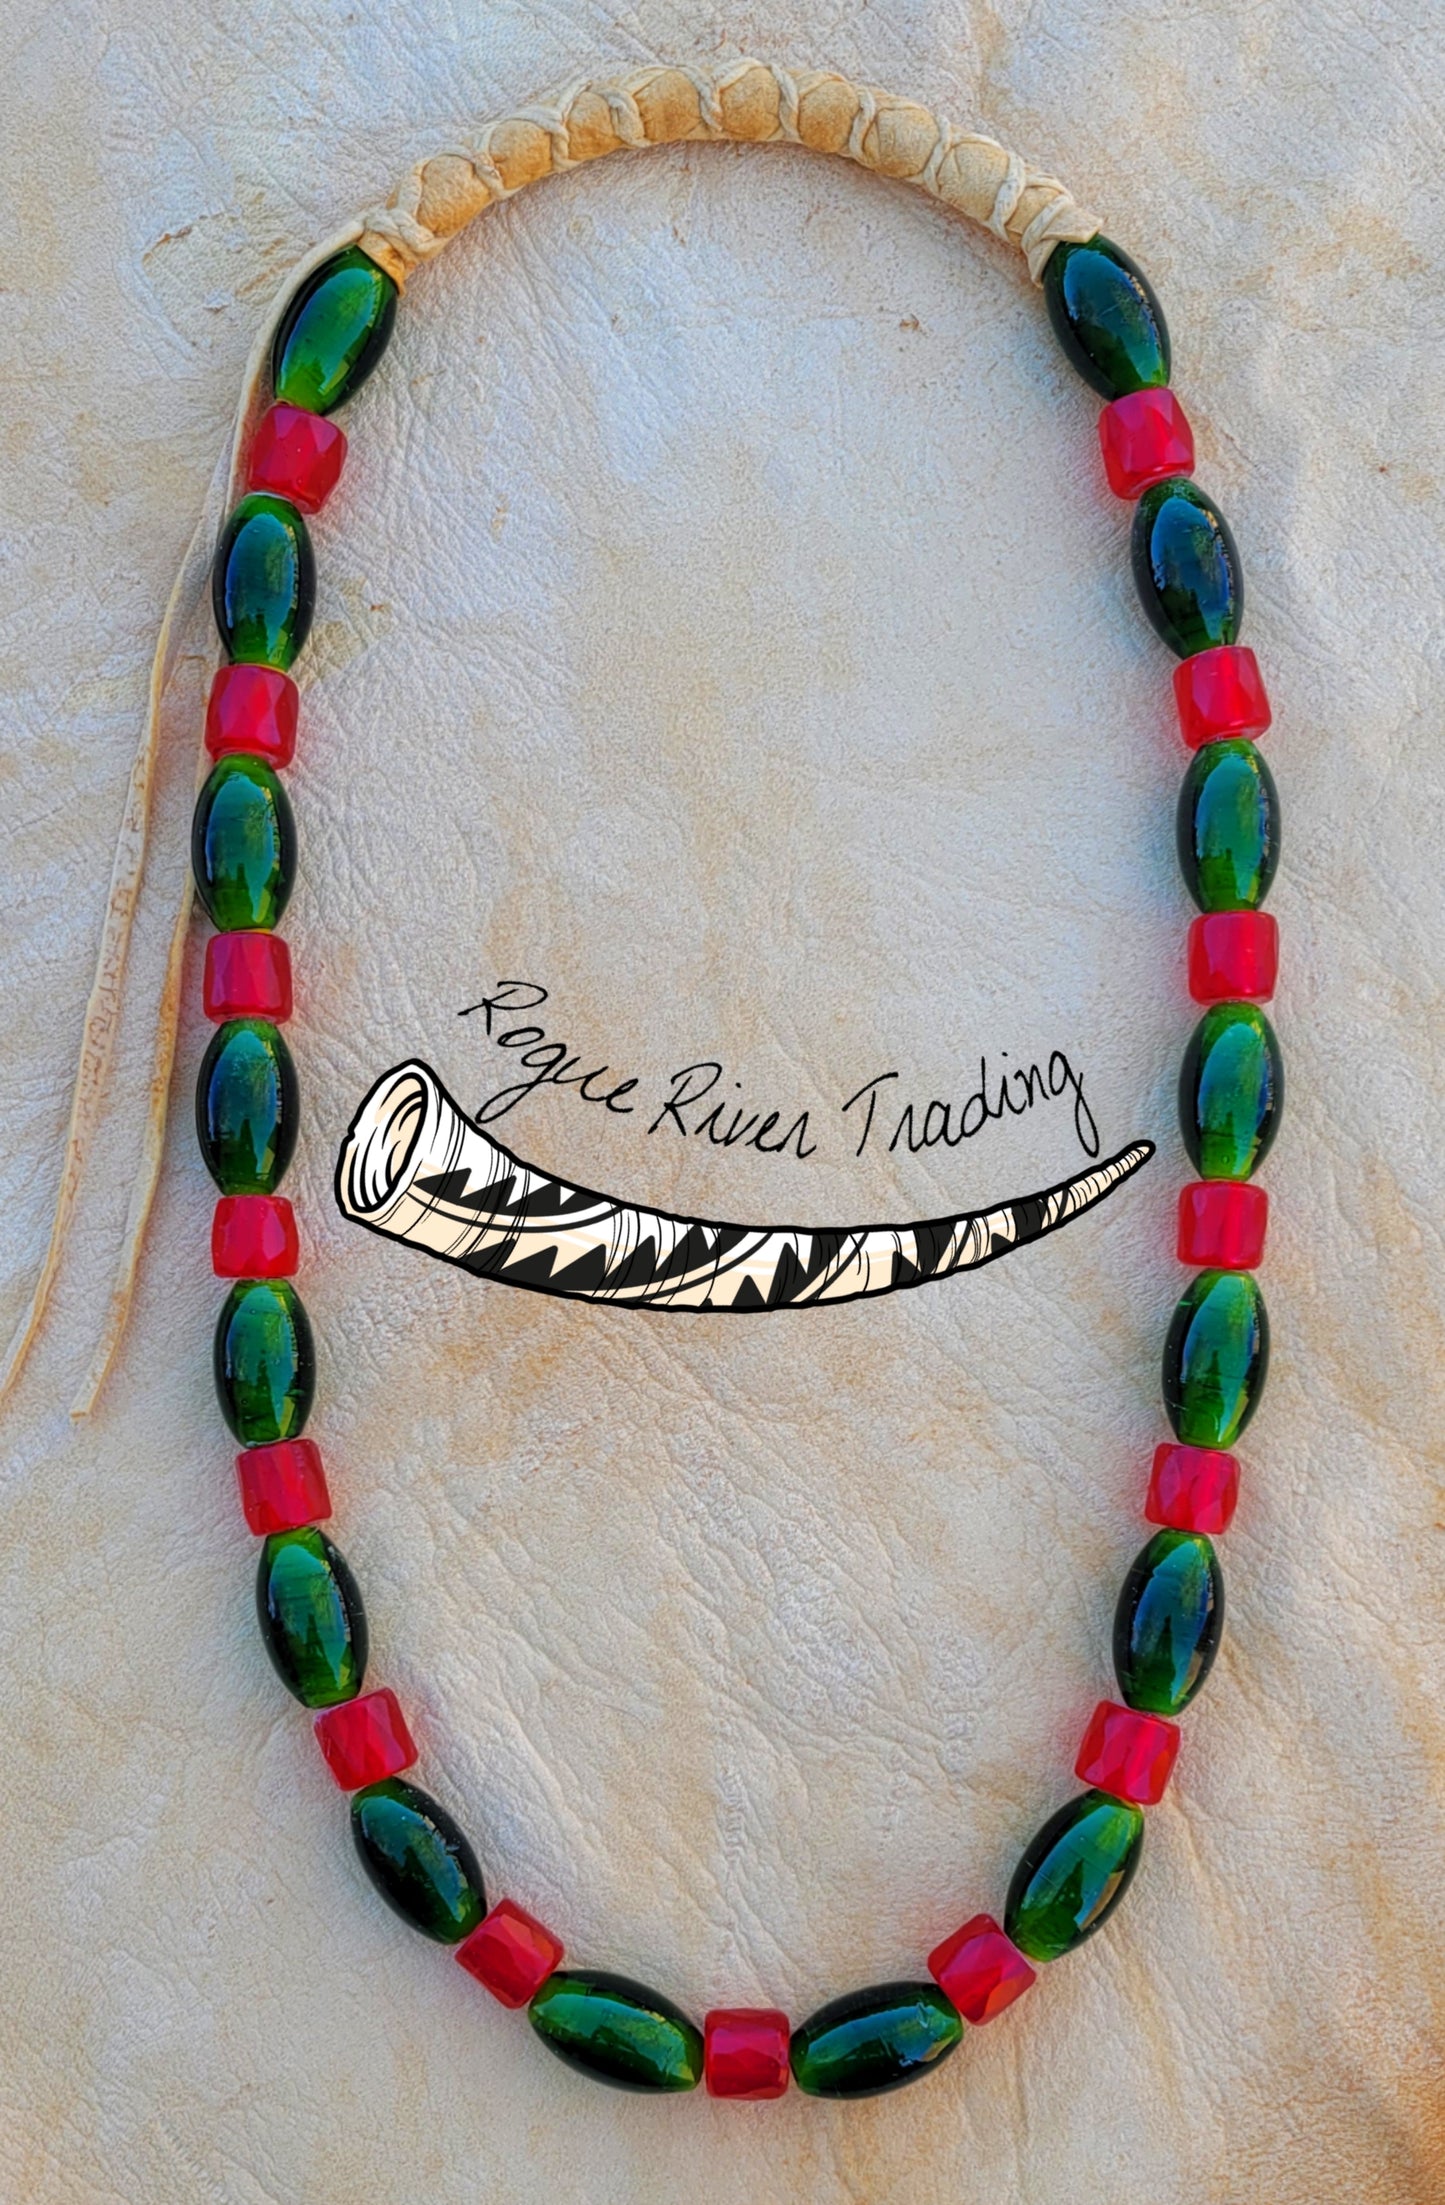 1 of a Kind Necklaces made with Rogue River trade beads.